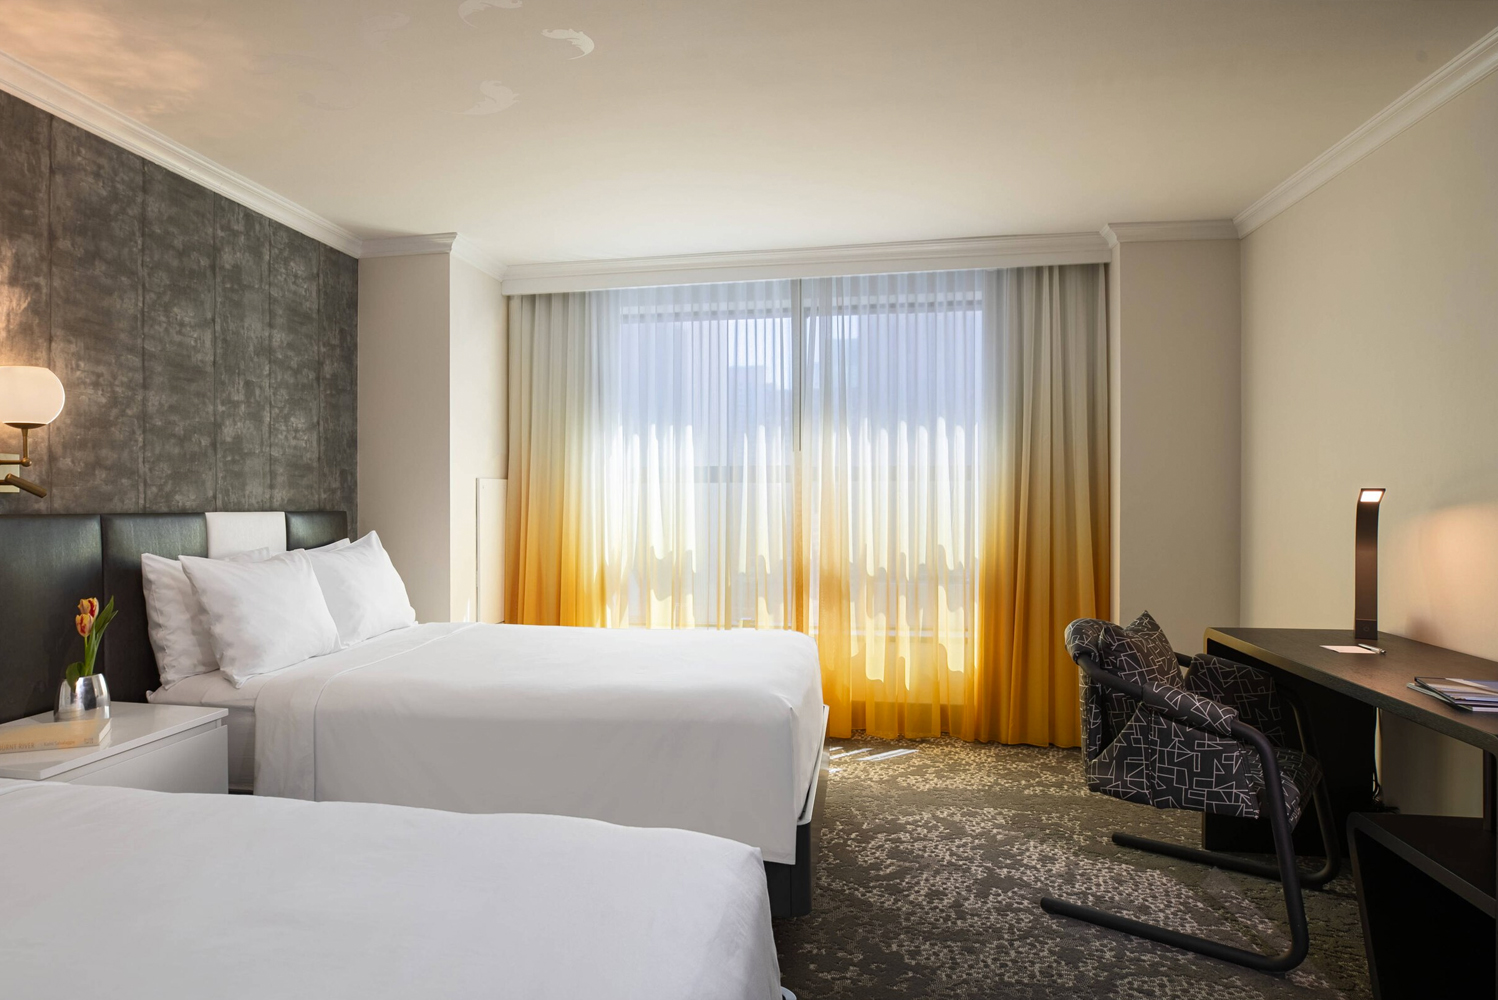 Renaissance New York Times Square completely redesigned its 317 guestrooms and suites following the earlier completion of it